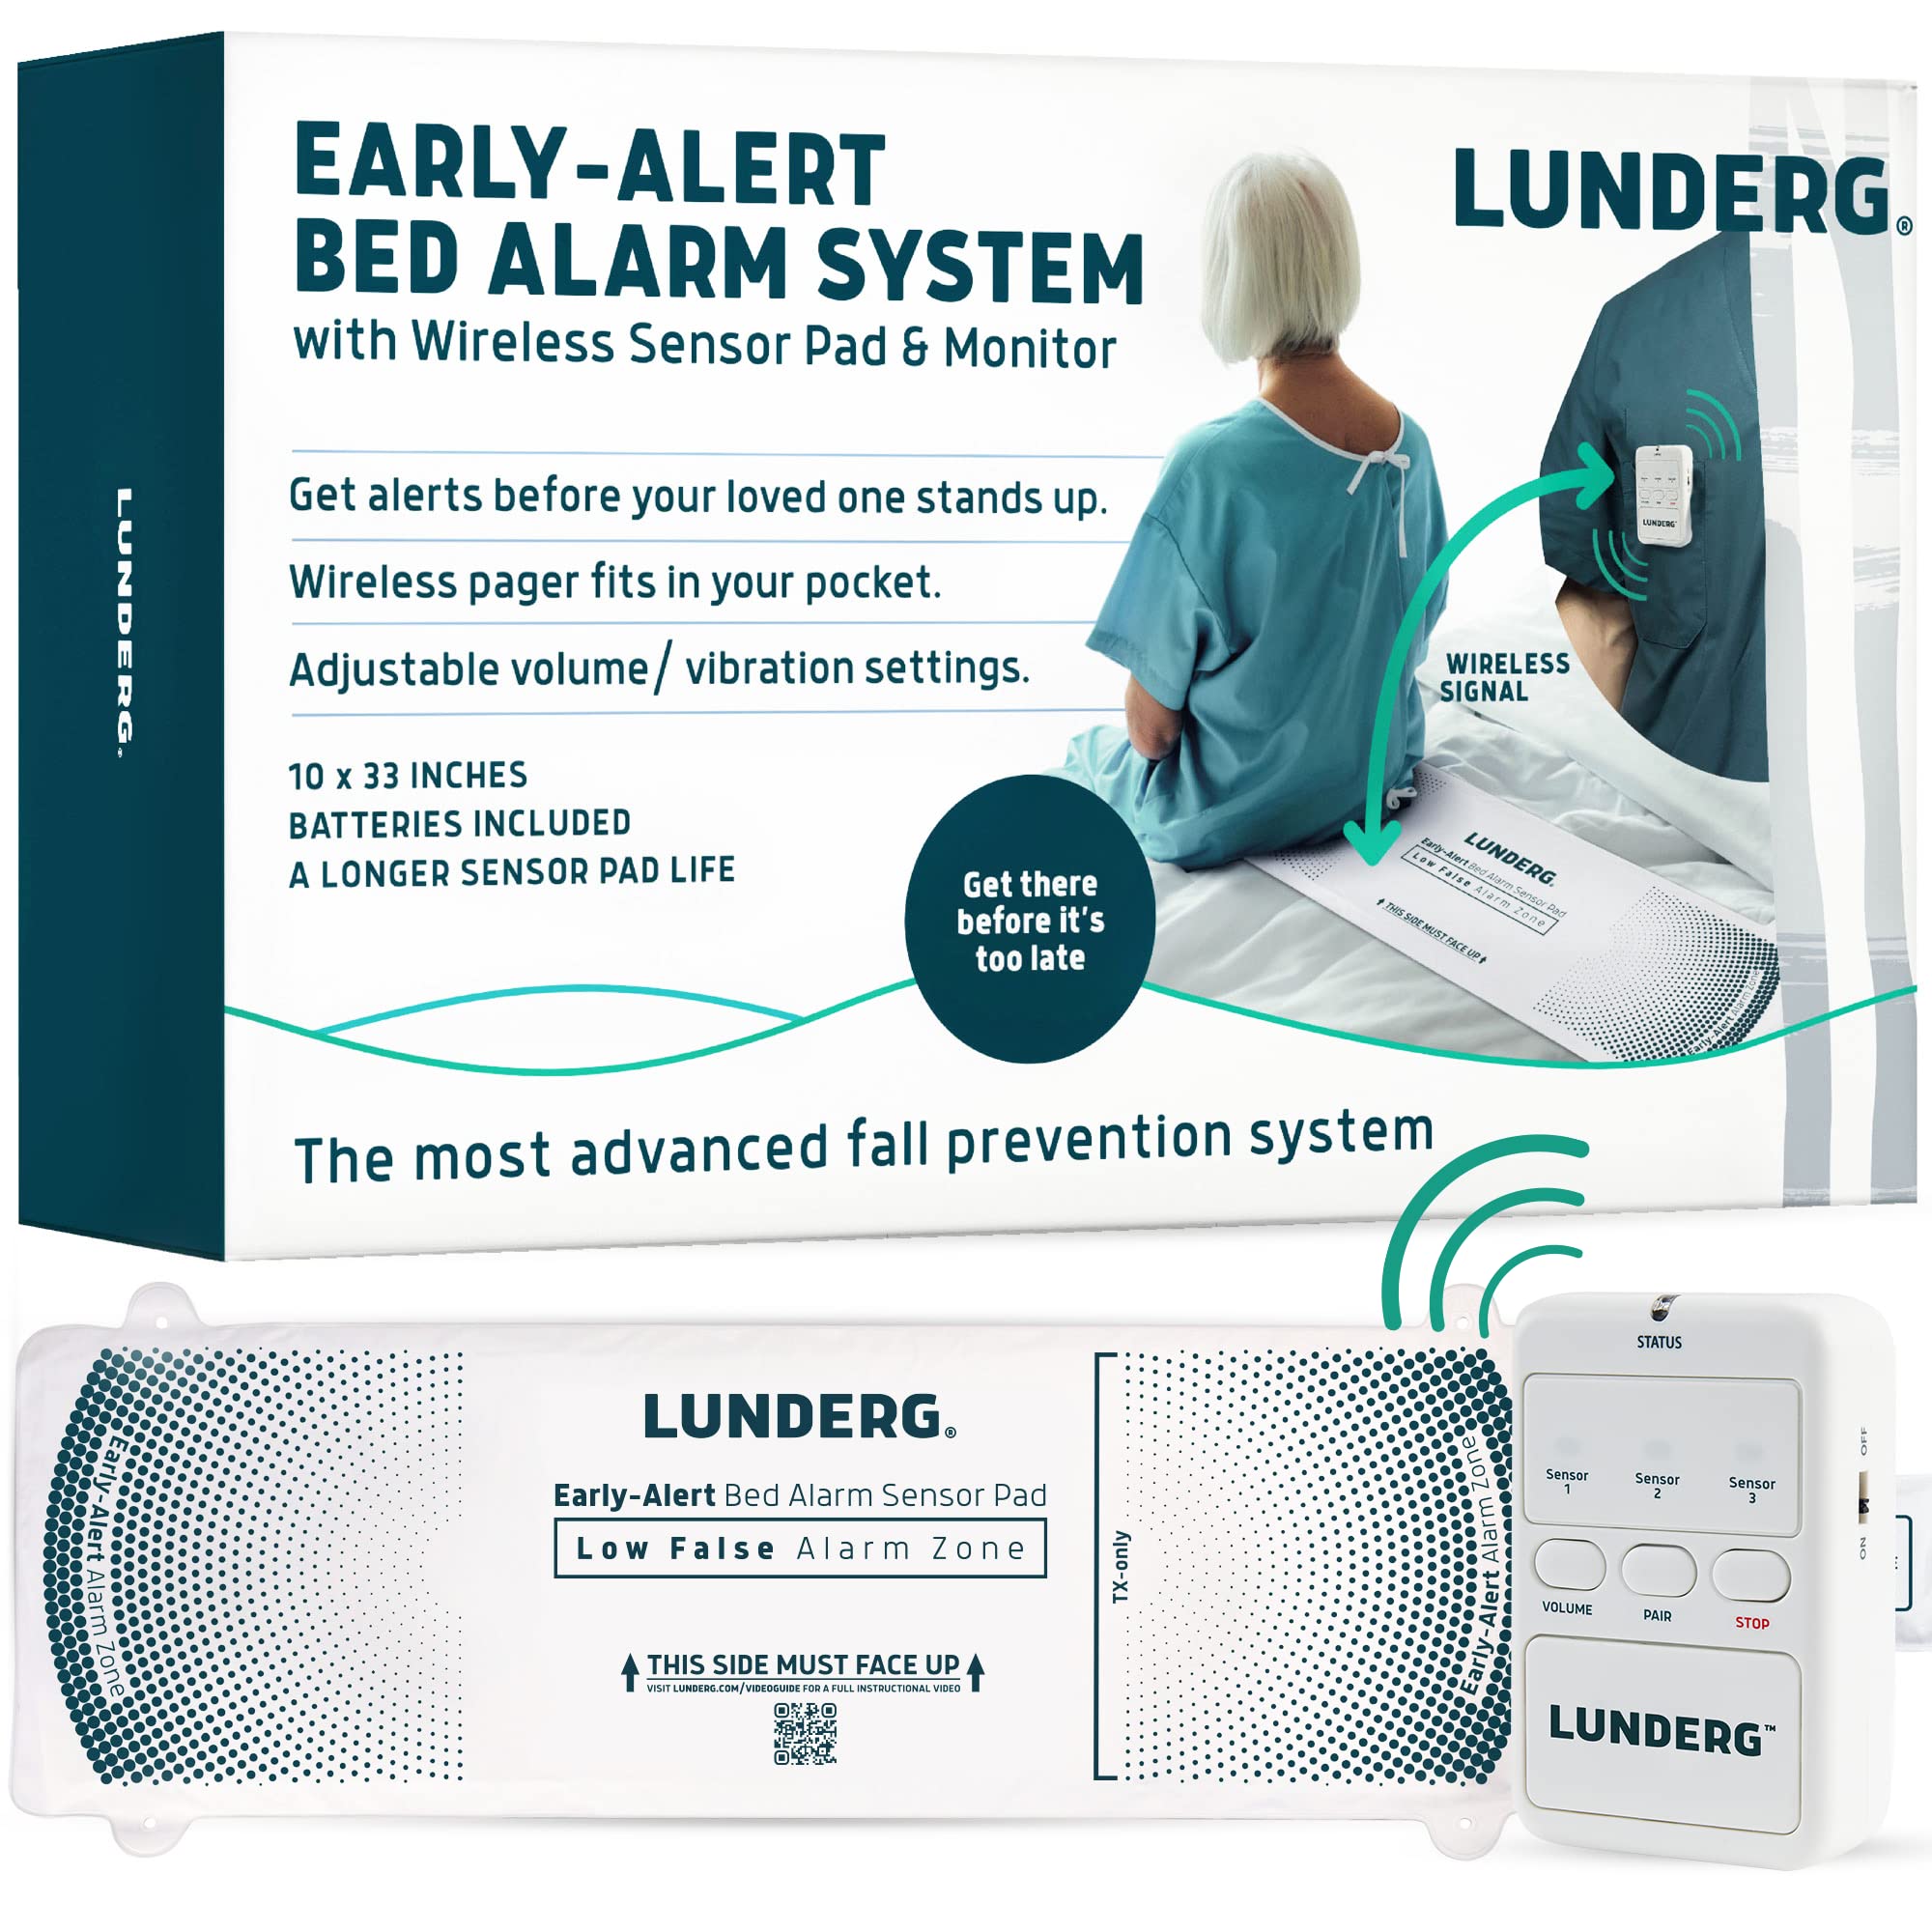 Lunderg Early Alert Bed Alarm